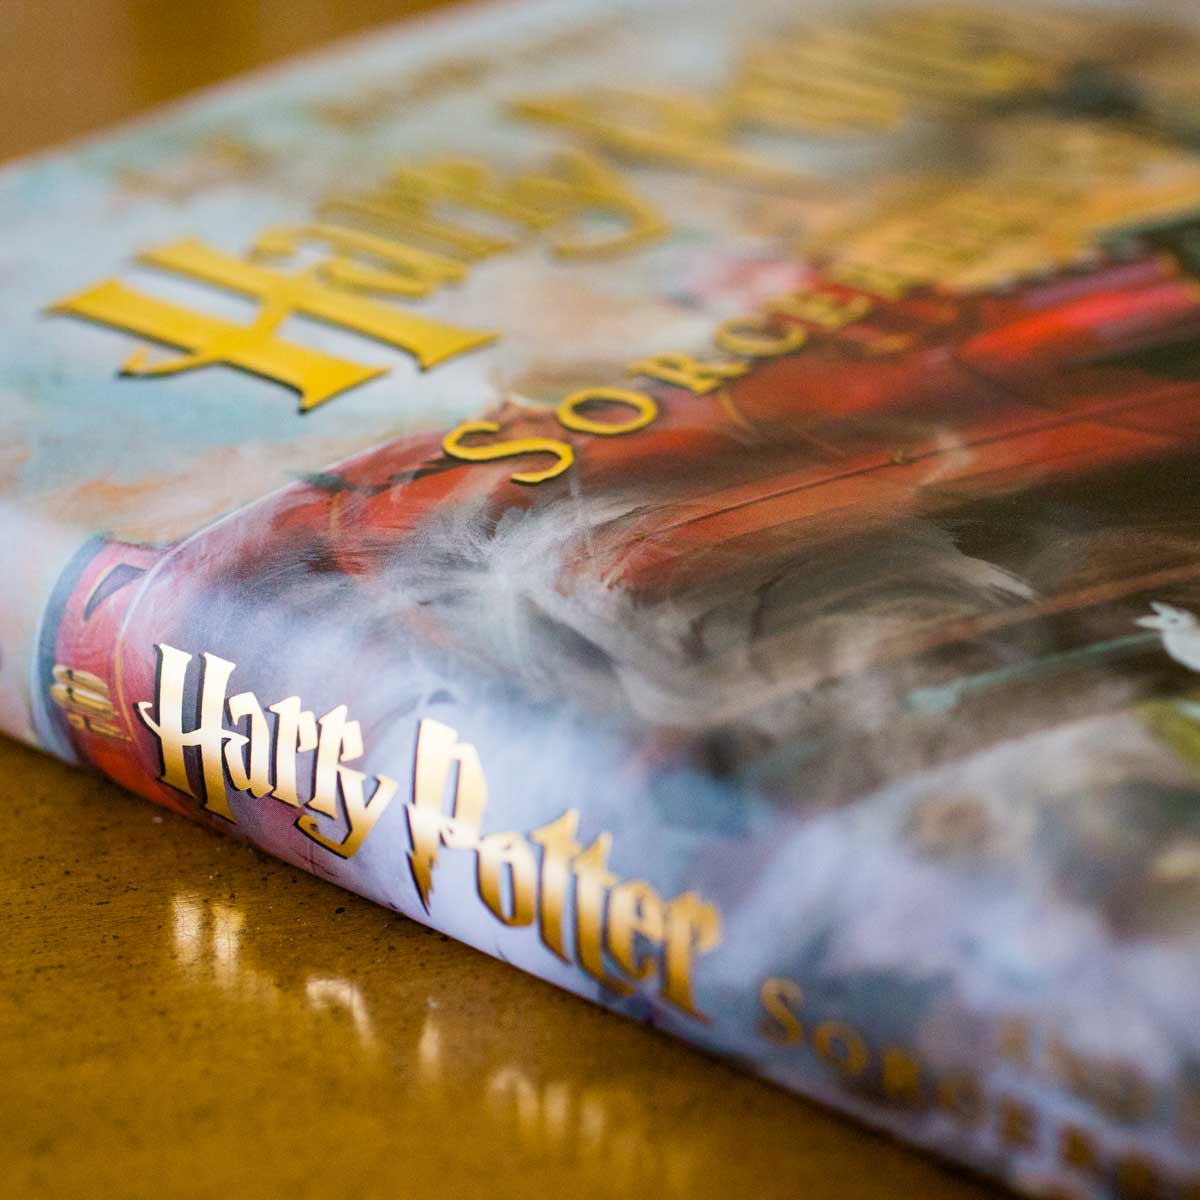 A copy of the illustrated Harry Potter book is on the table.